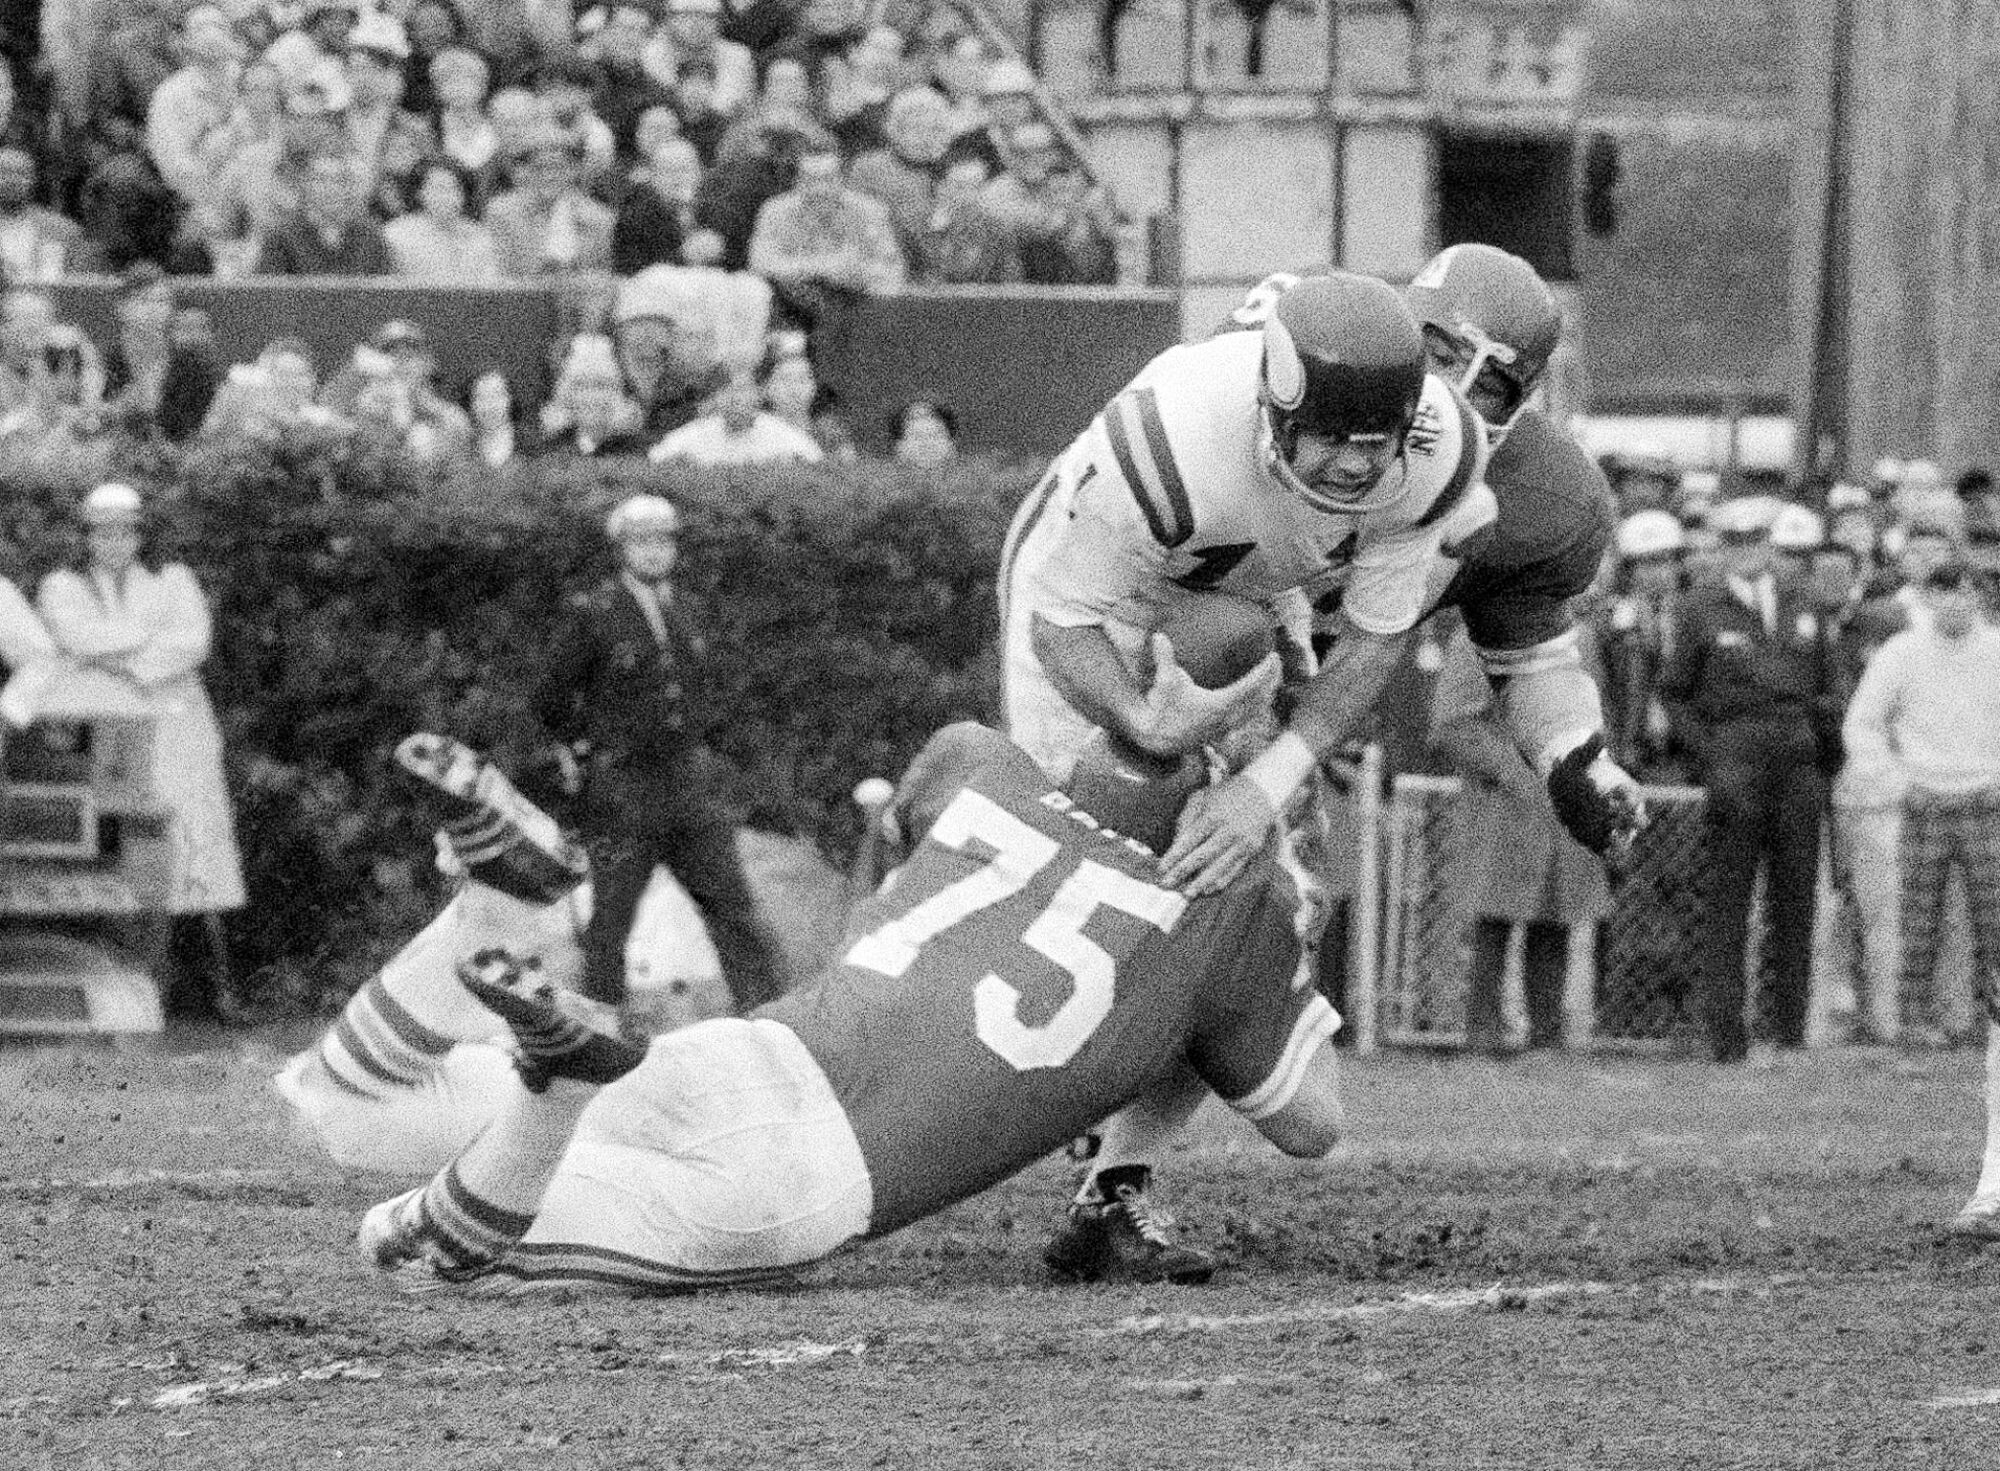 Minnesota quarterback Joe Kapp is hauled down by Kansas City's Jerry Mays and others as Kapp plunges forward.